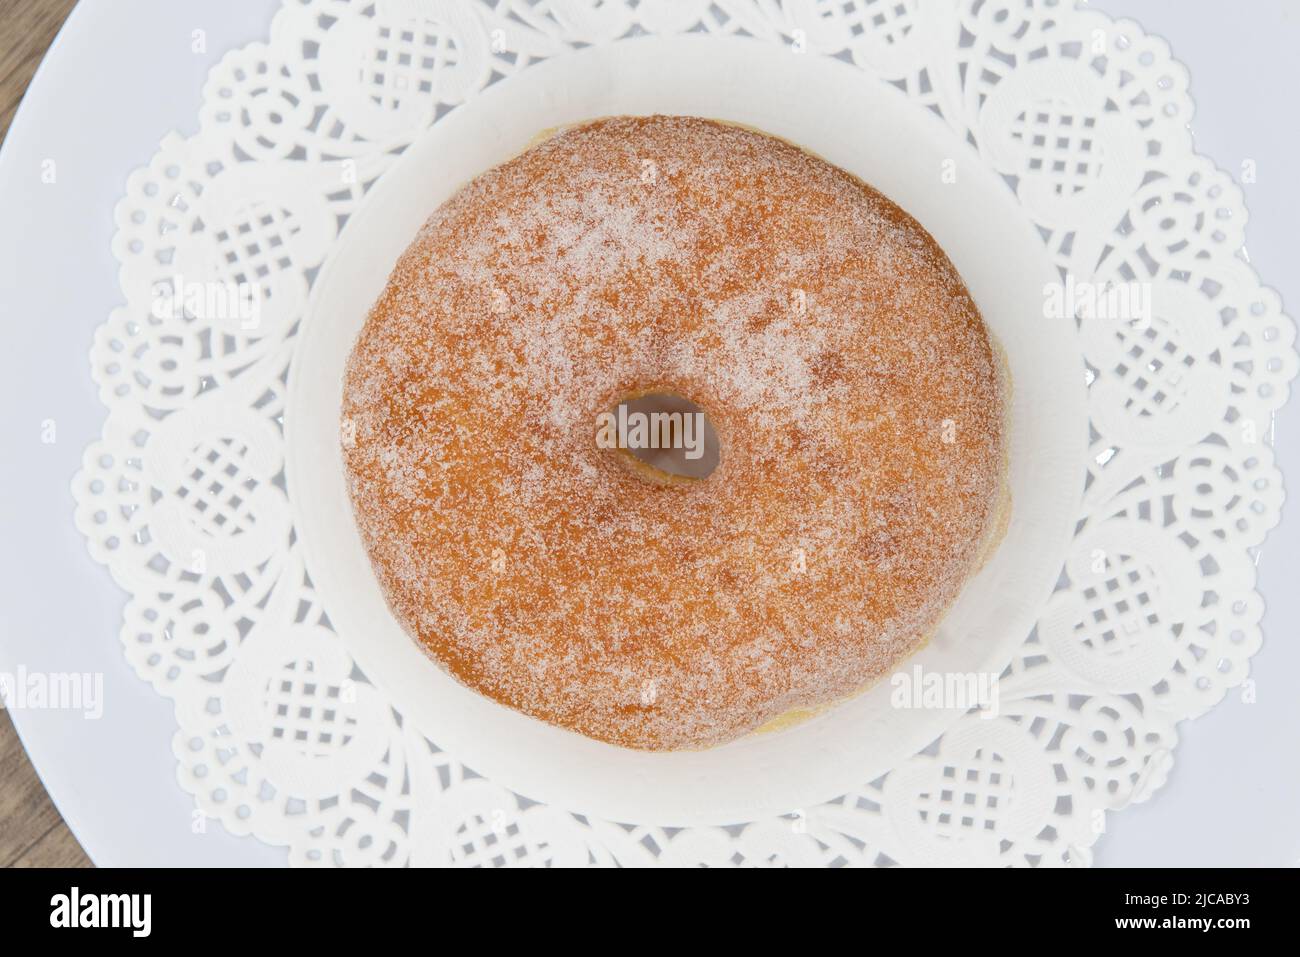 Overhead view of tempting fresh from the oven sugar glazed donut from the bakery served on a plate. Stock Photo